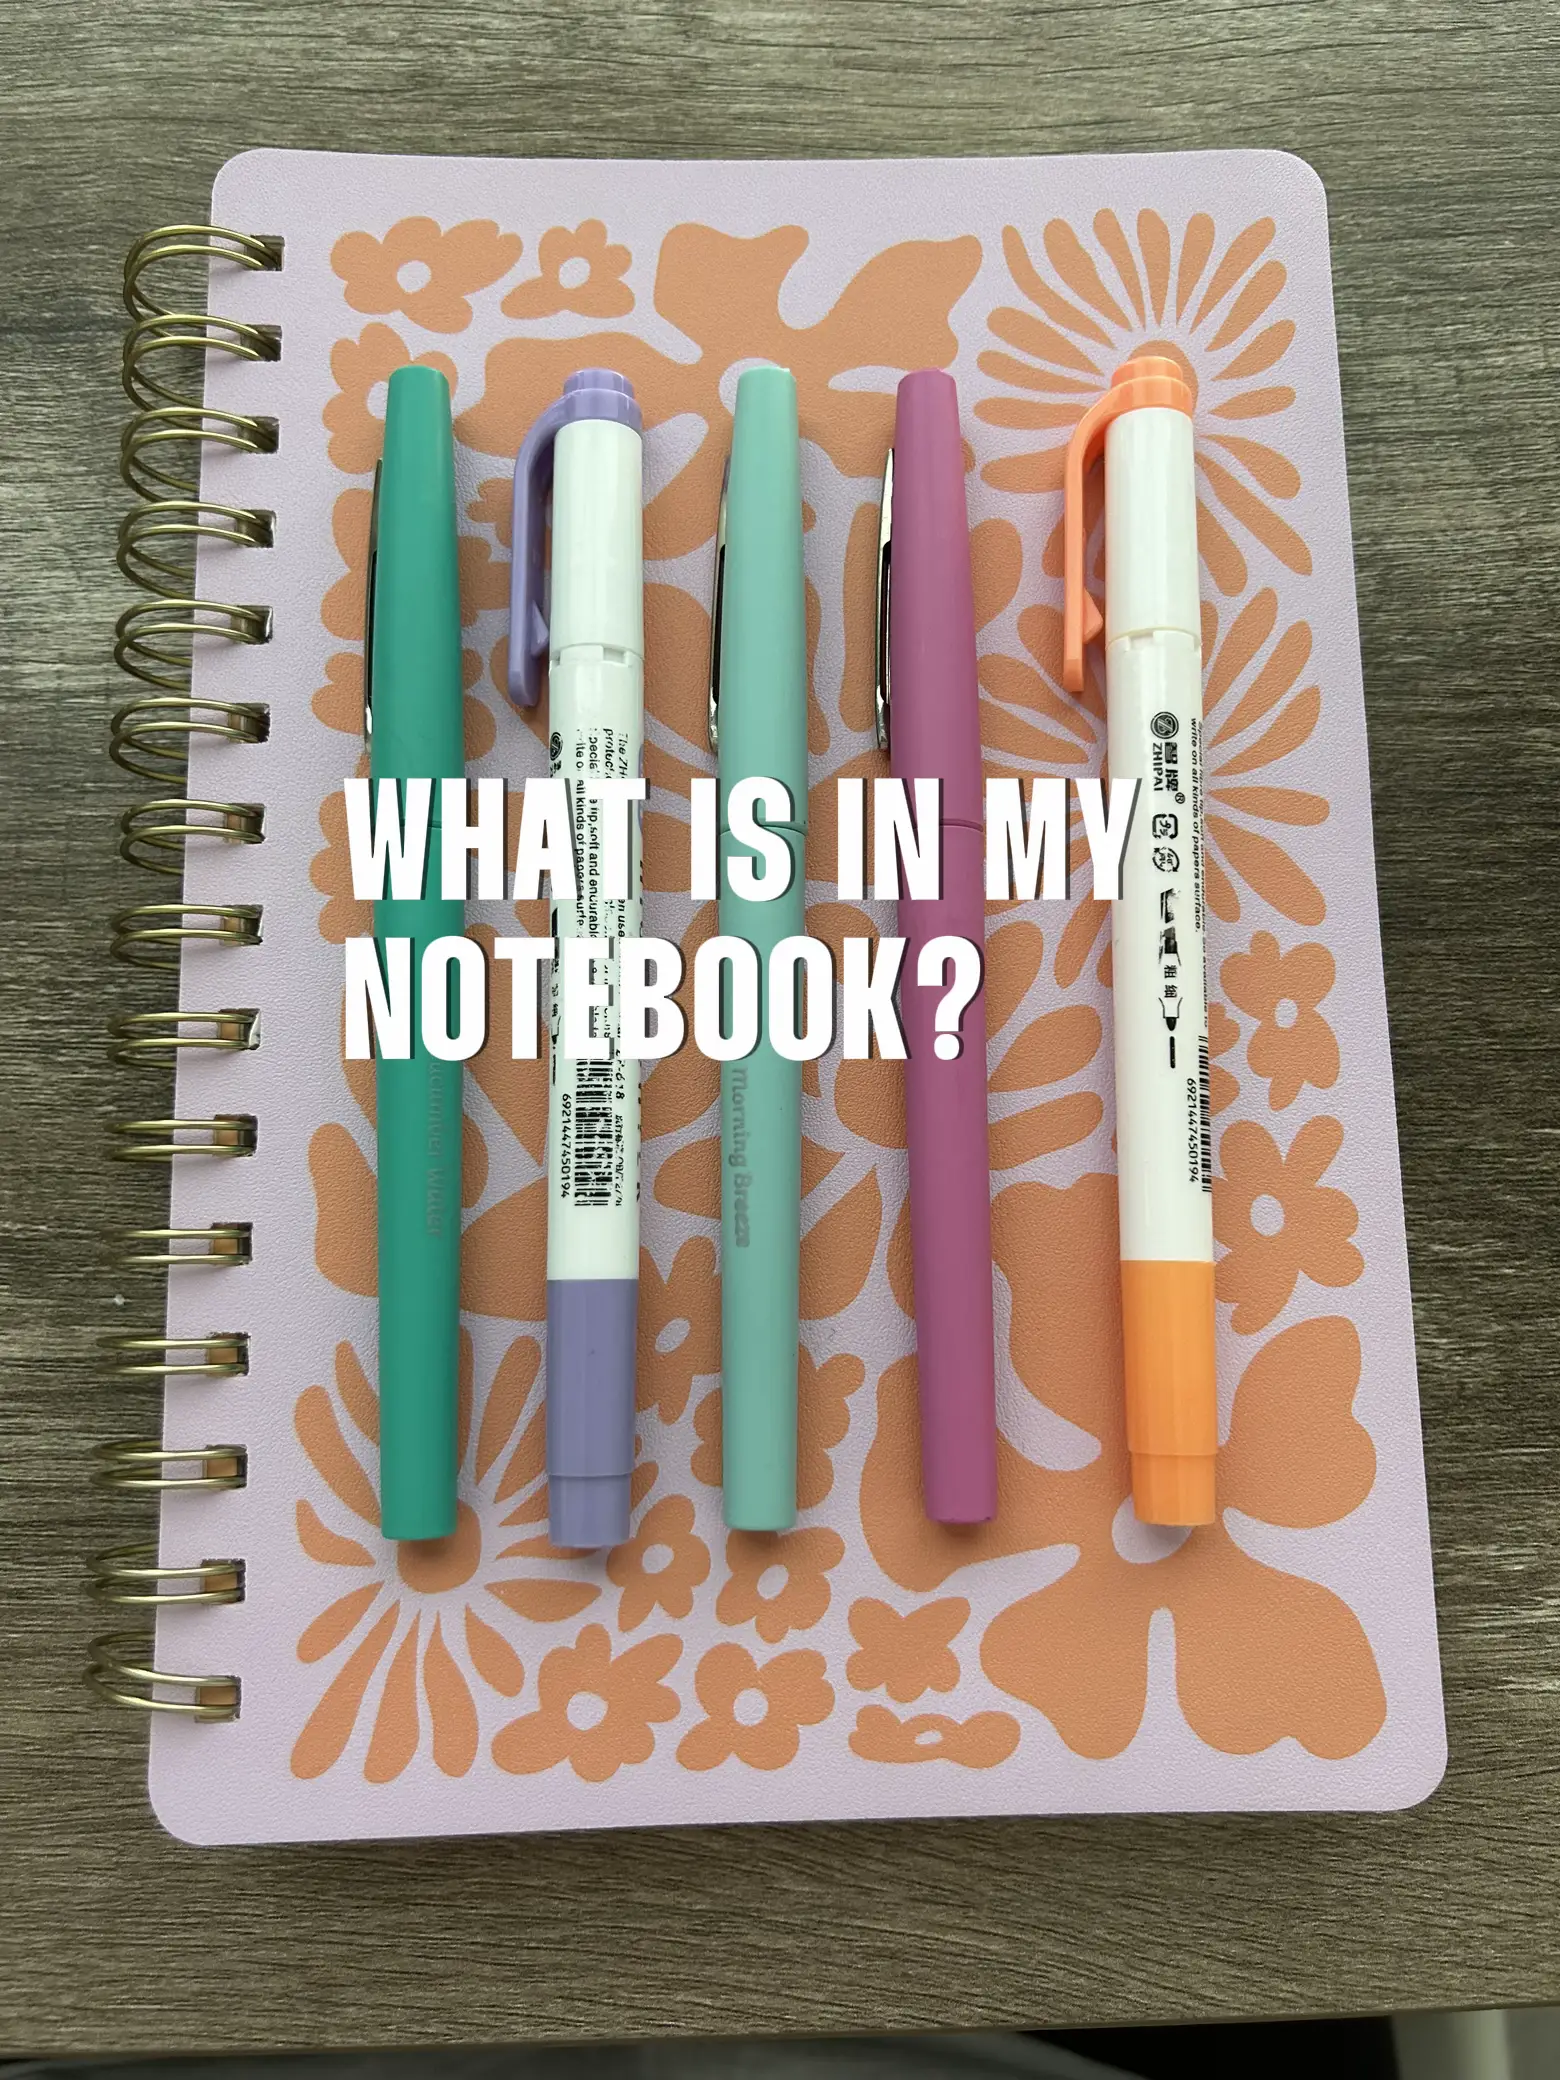 Writing in Notebooks As A Hobby - Lemon8 Search